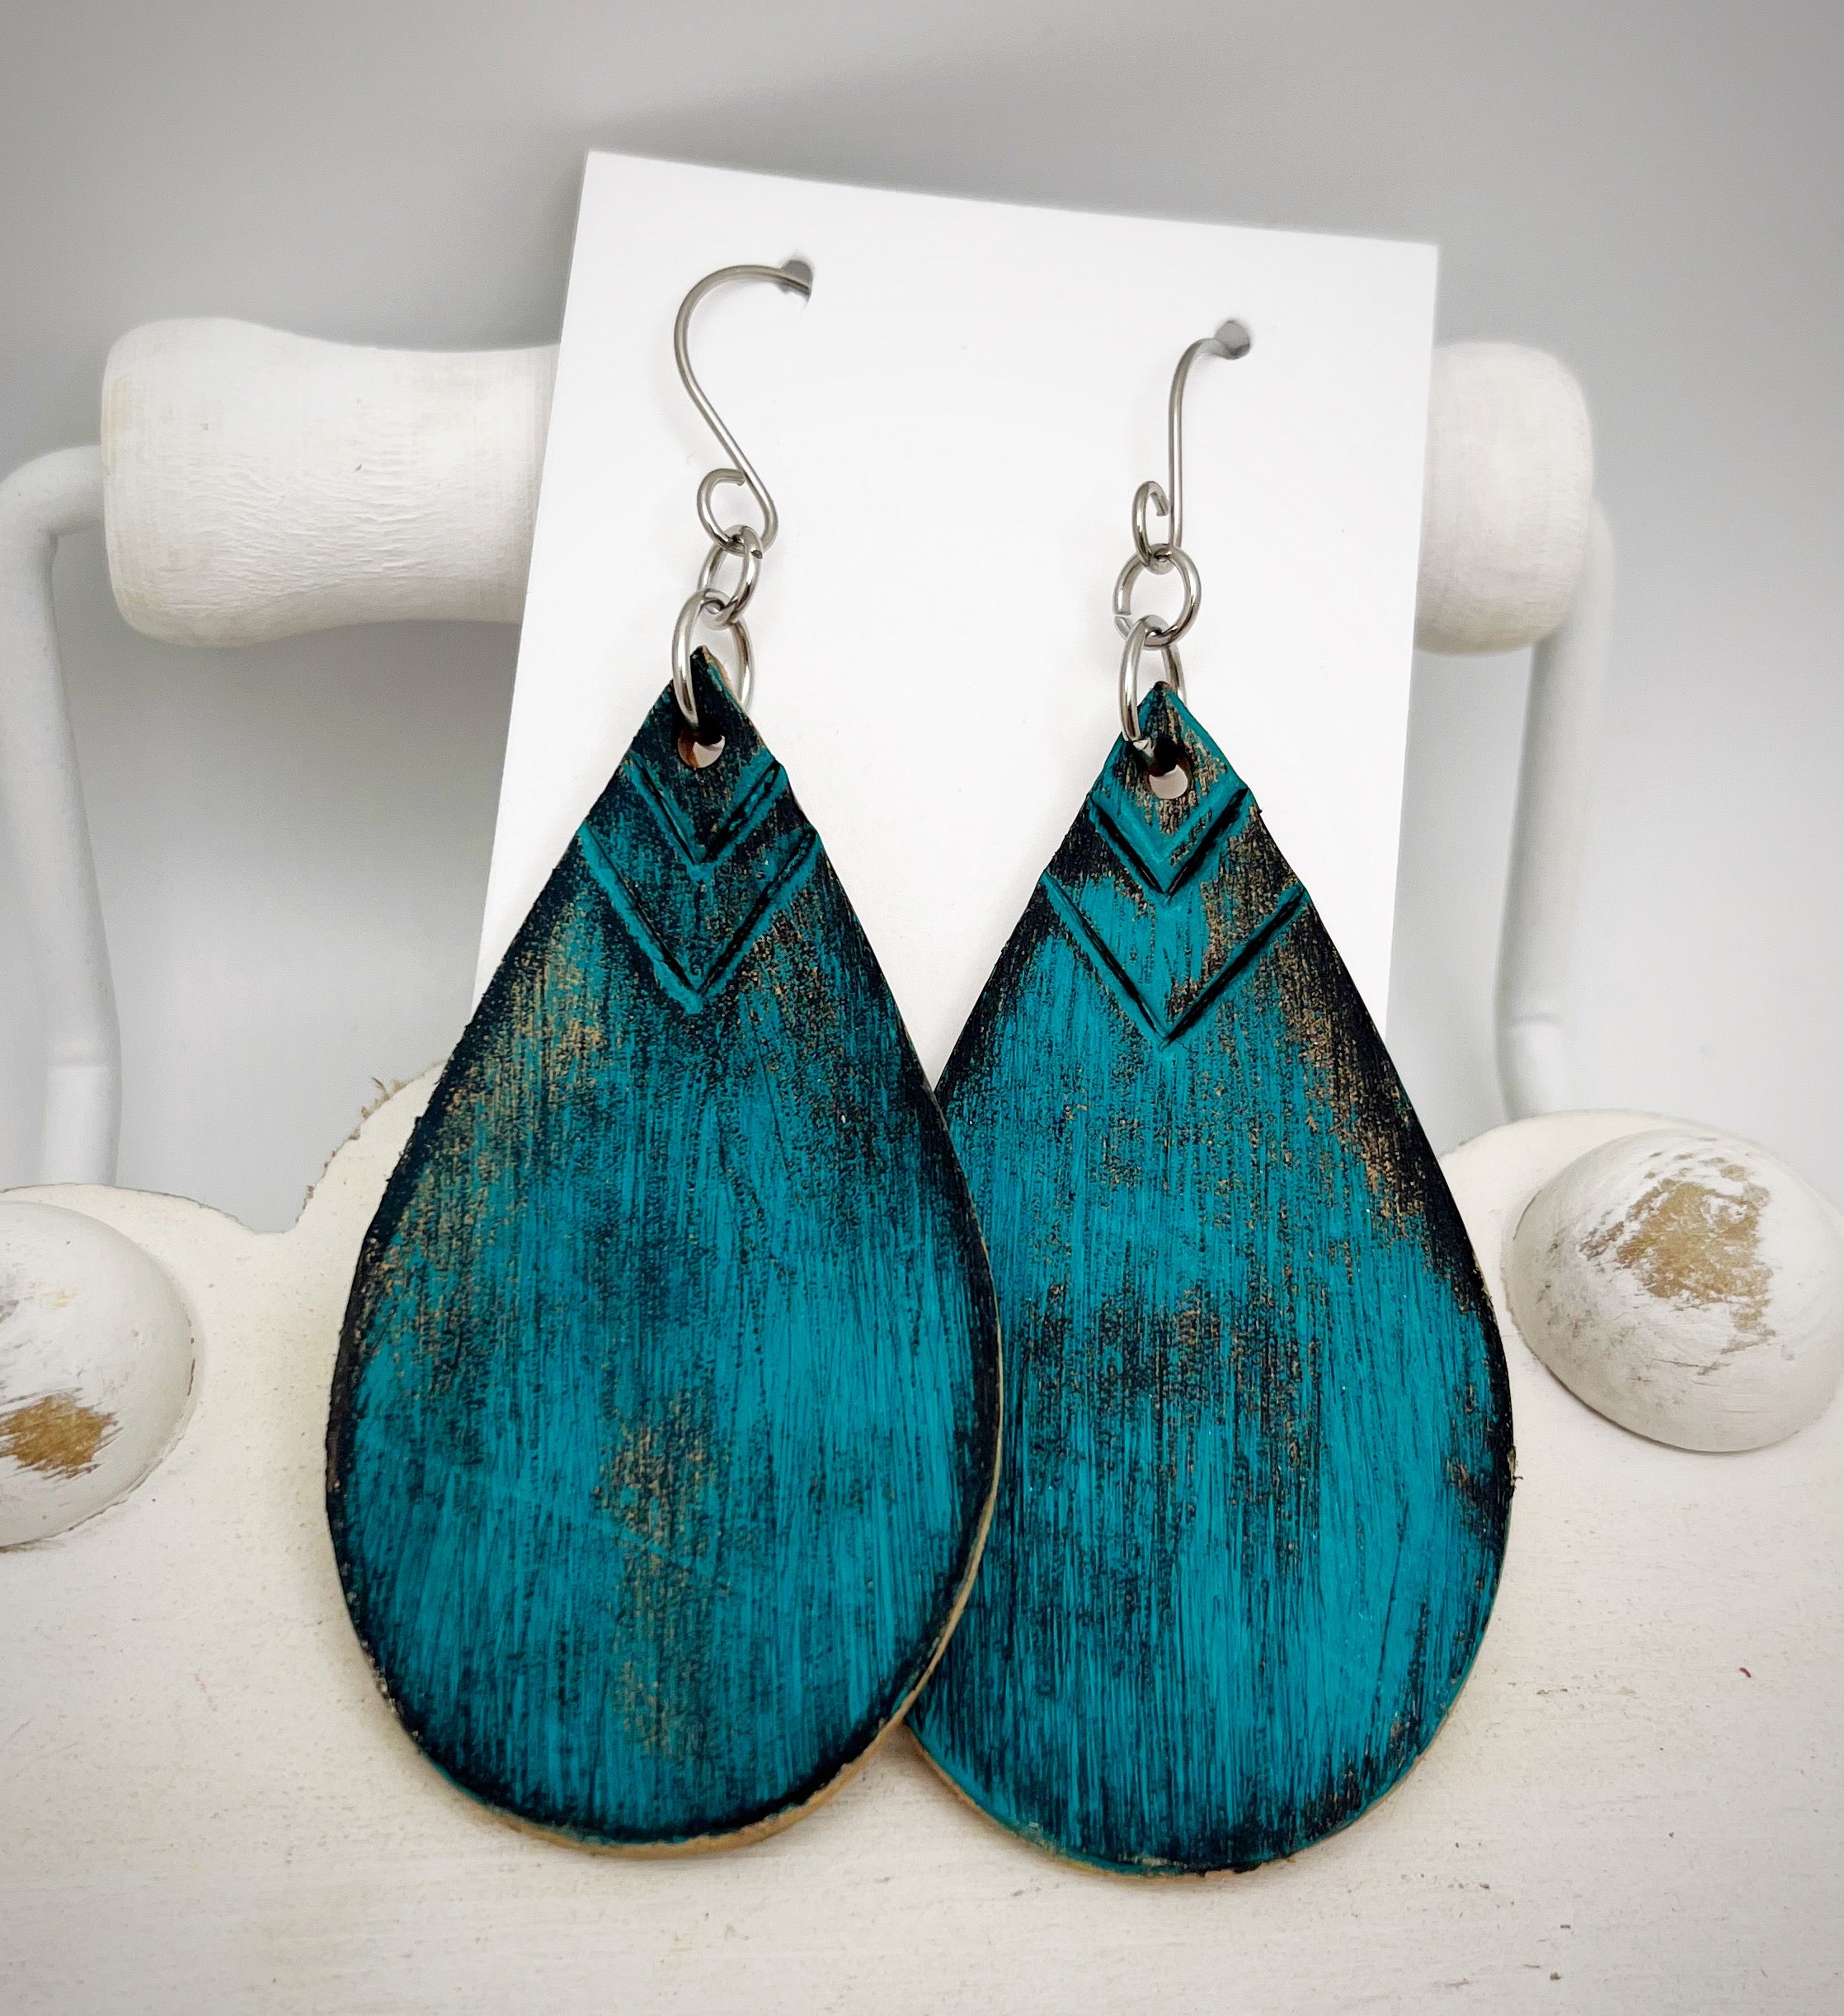 Tooled Leather Earrings- Darby/ Turq/black distressed